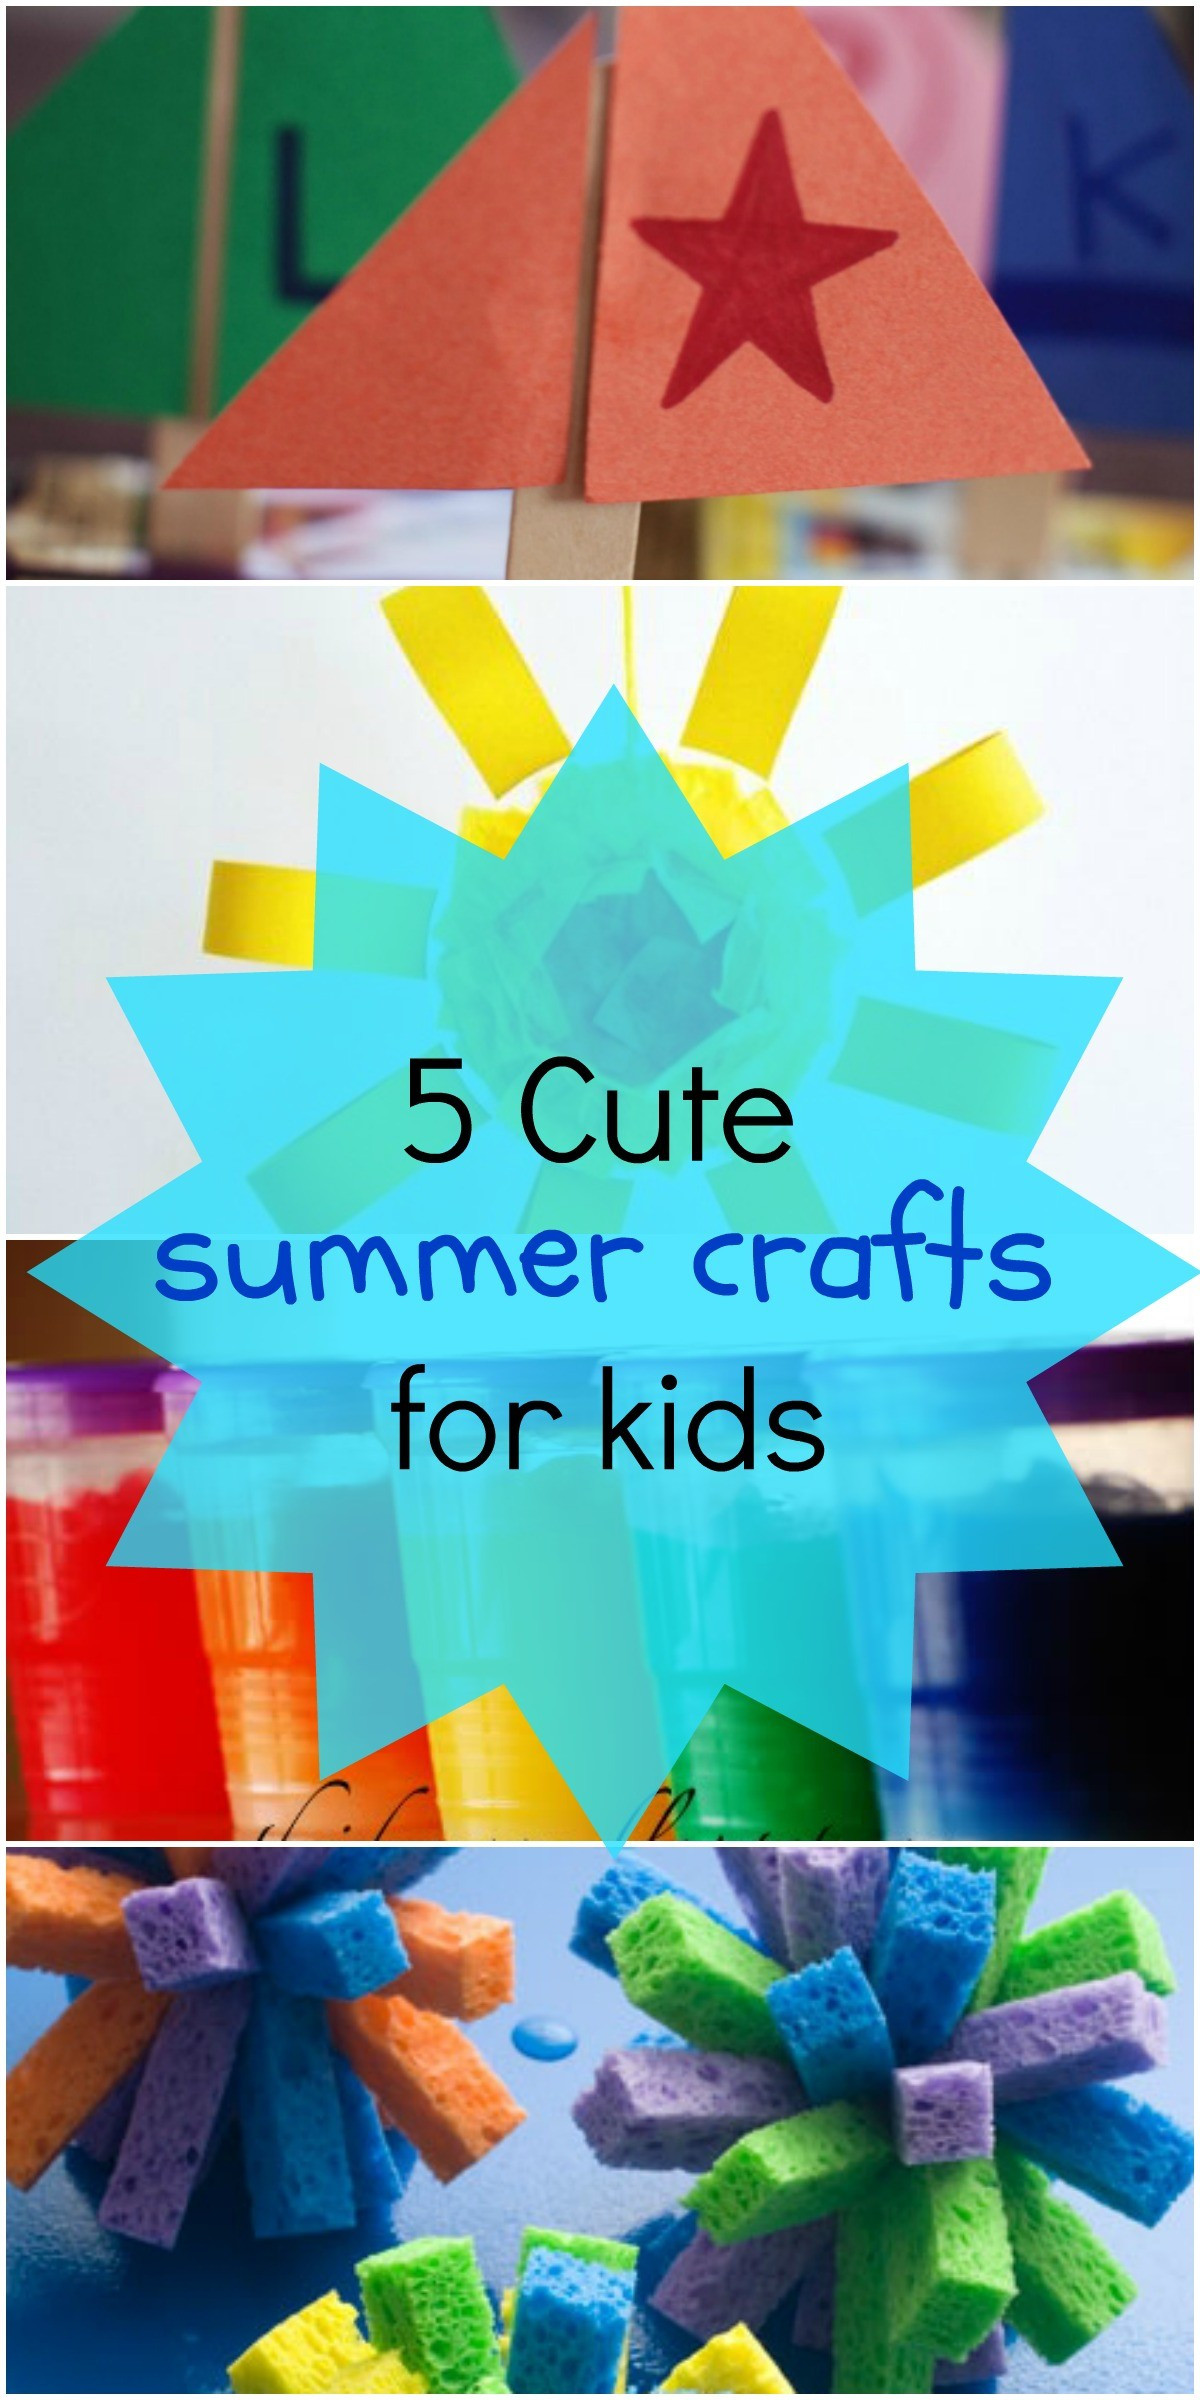 Fun Summer Crafts For Kids
 5 Fun Summer Crafts for Kids Love These Art Project Ideas